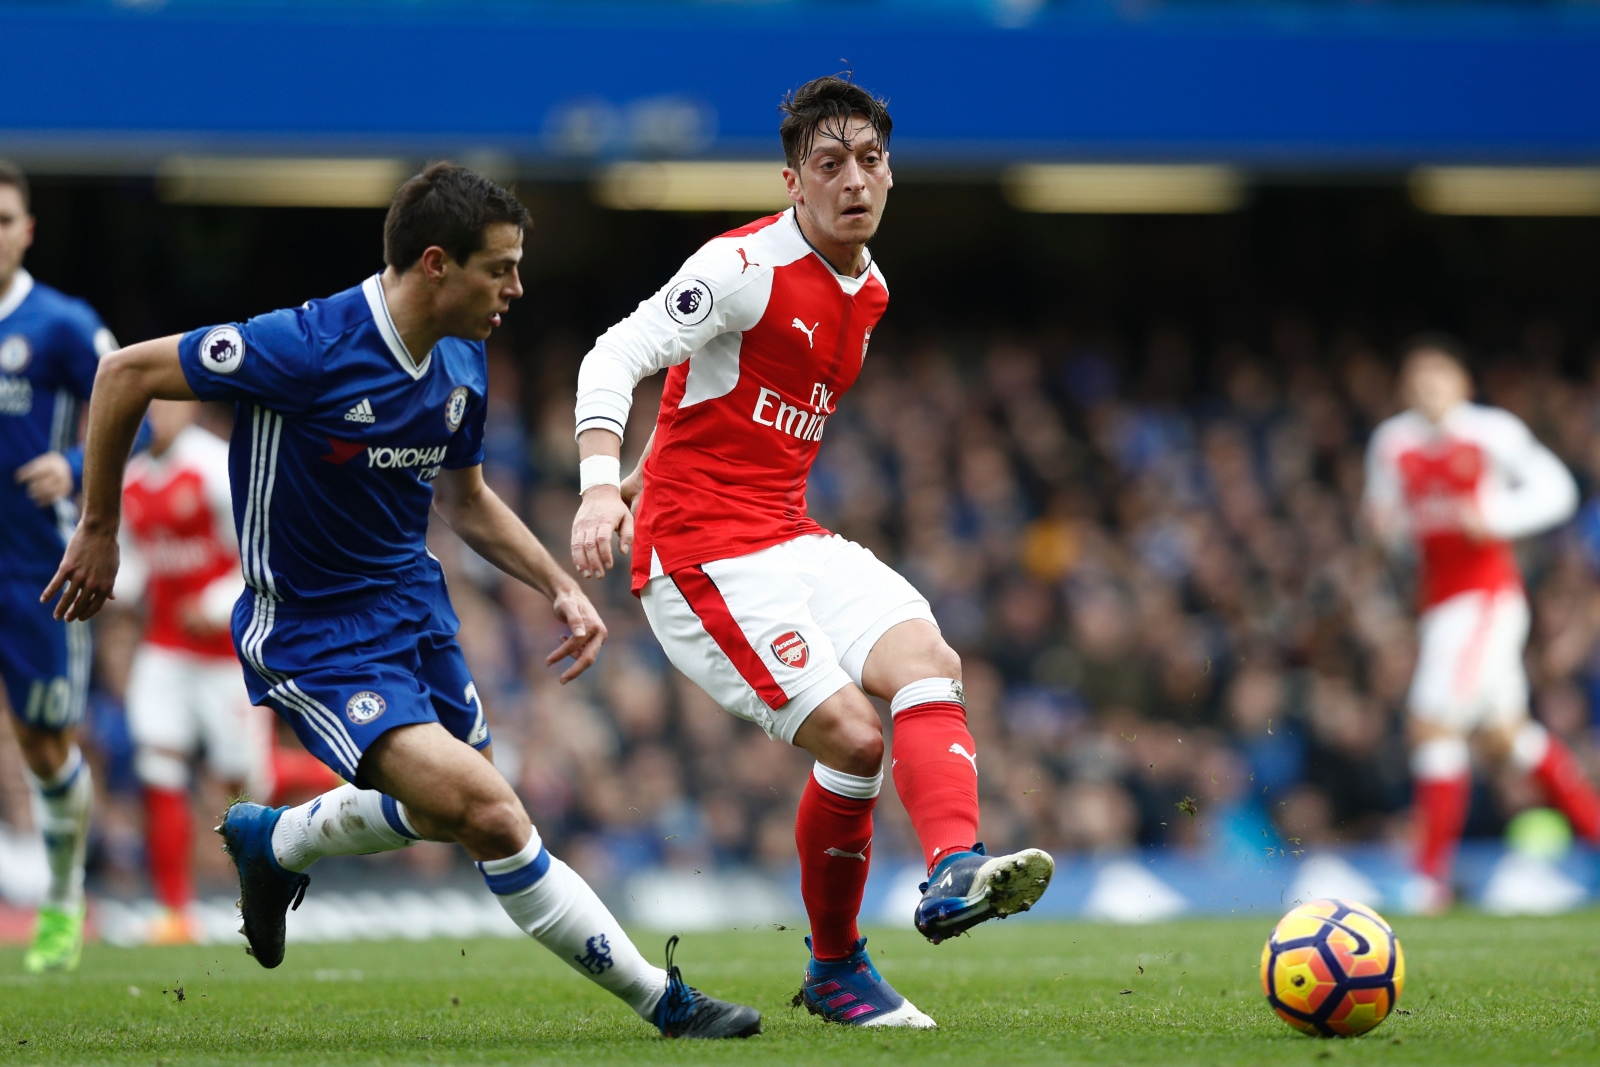 Arsene Wenger needs to get more out of Mesut Ozil, says Martin Keown